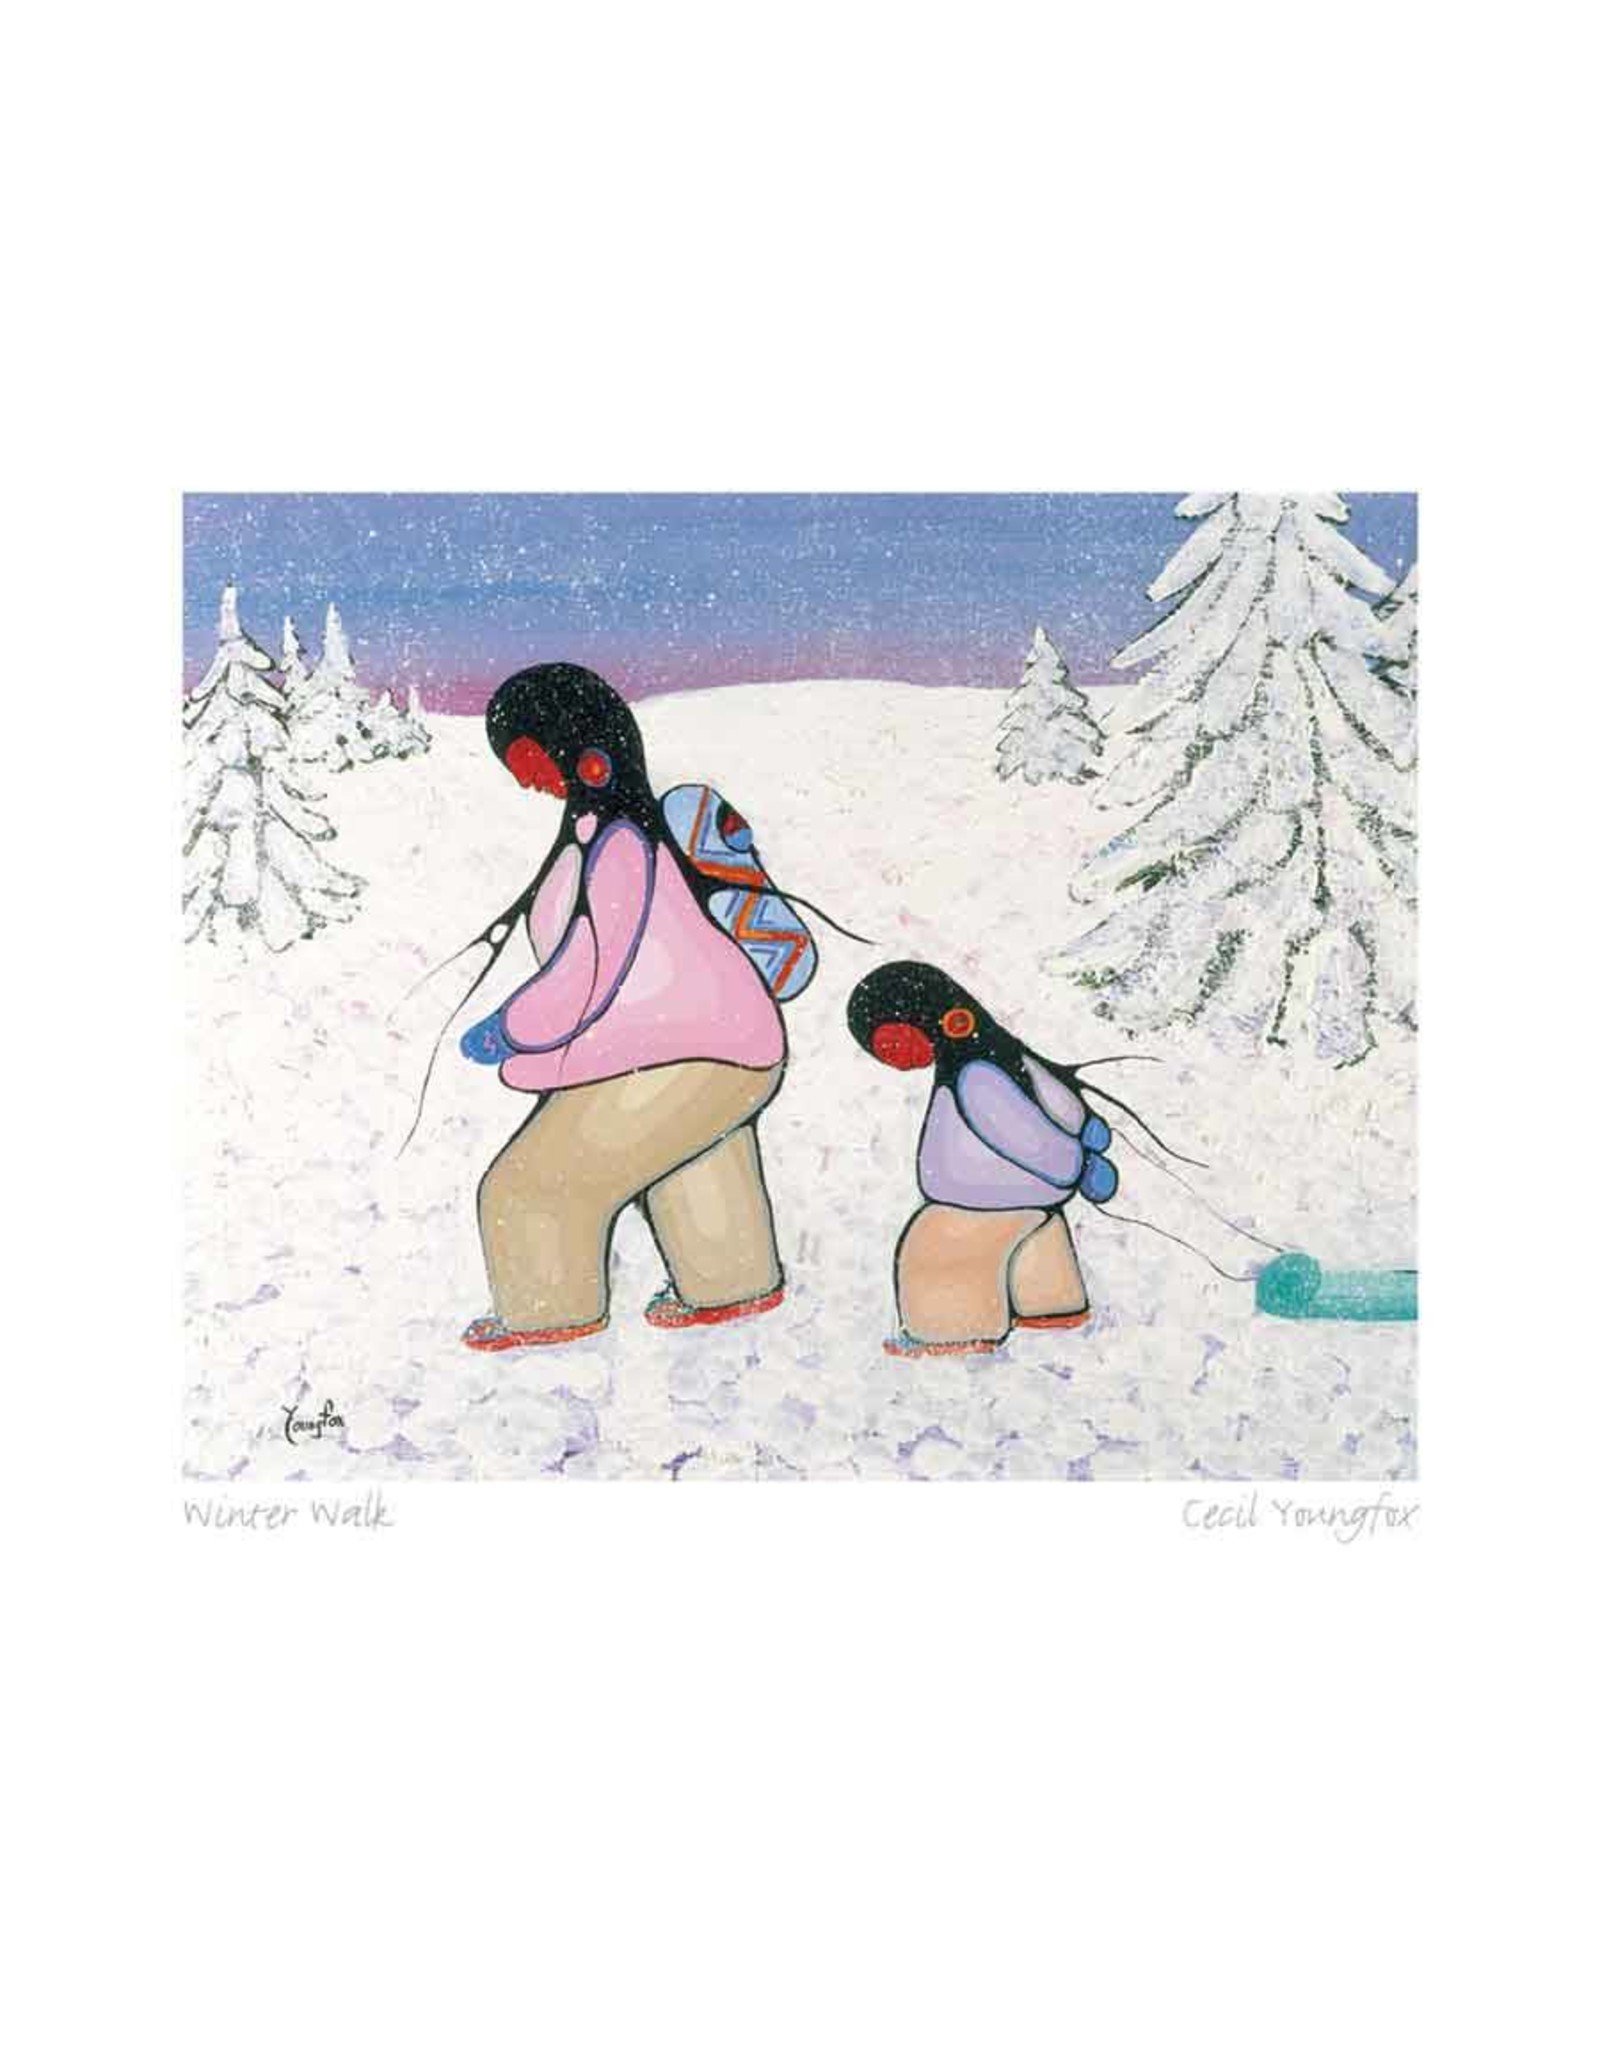 Winter Walk by Cecil Youngfox Framed